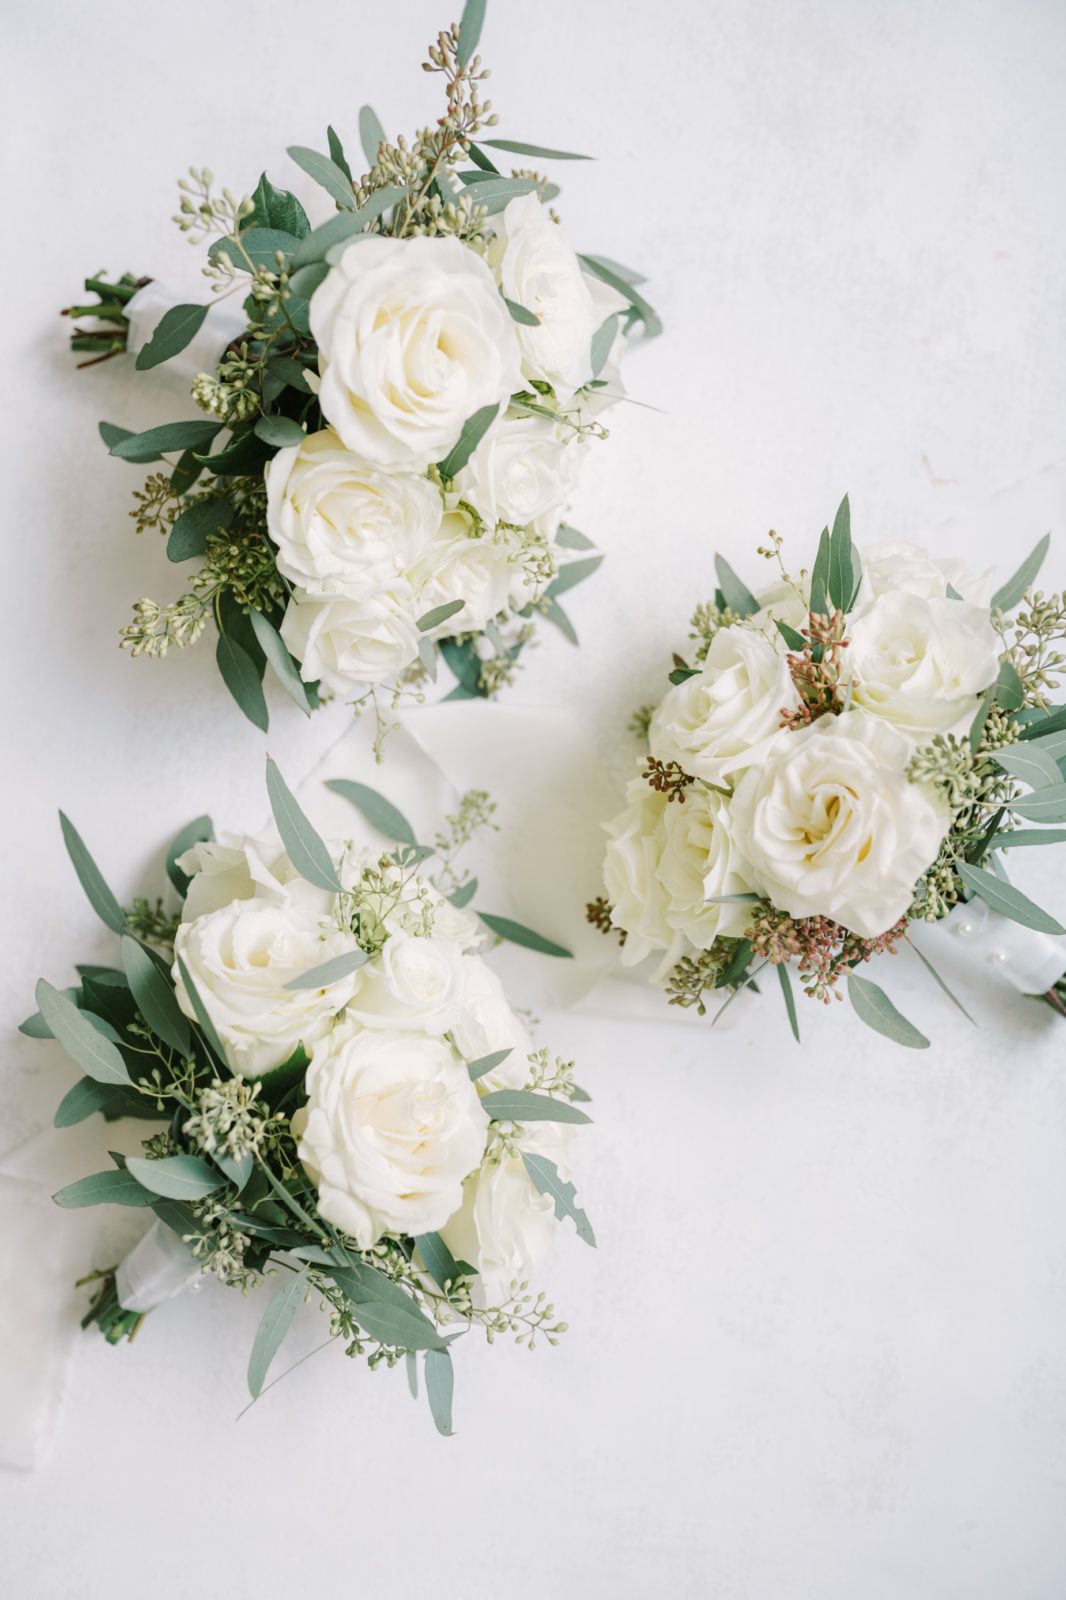 Christina Elliott Photography captures pictures of white rose bridal bouquets for Texas Wedding. white rose bouquets #ChristinaElliottPhotography #ChristinaElliottWeddings #StillWatersRanchWedding #Texasweddings #countrywedding #ranchwedding